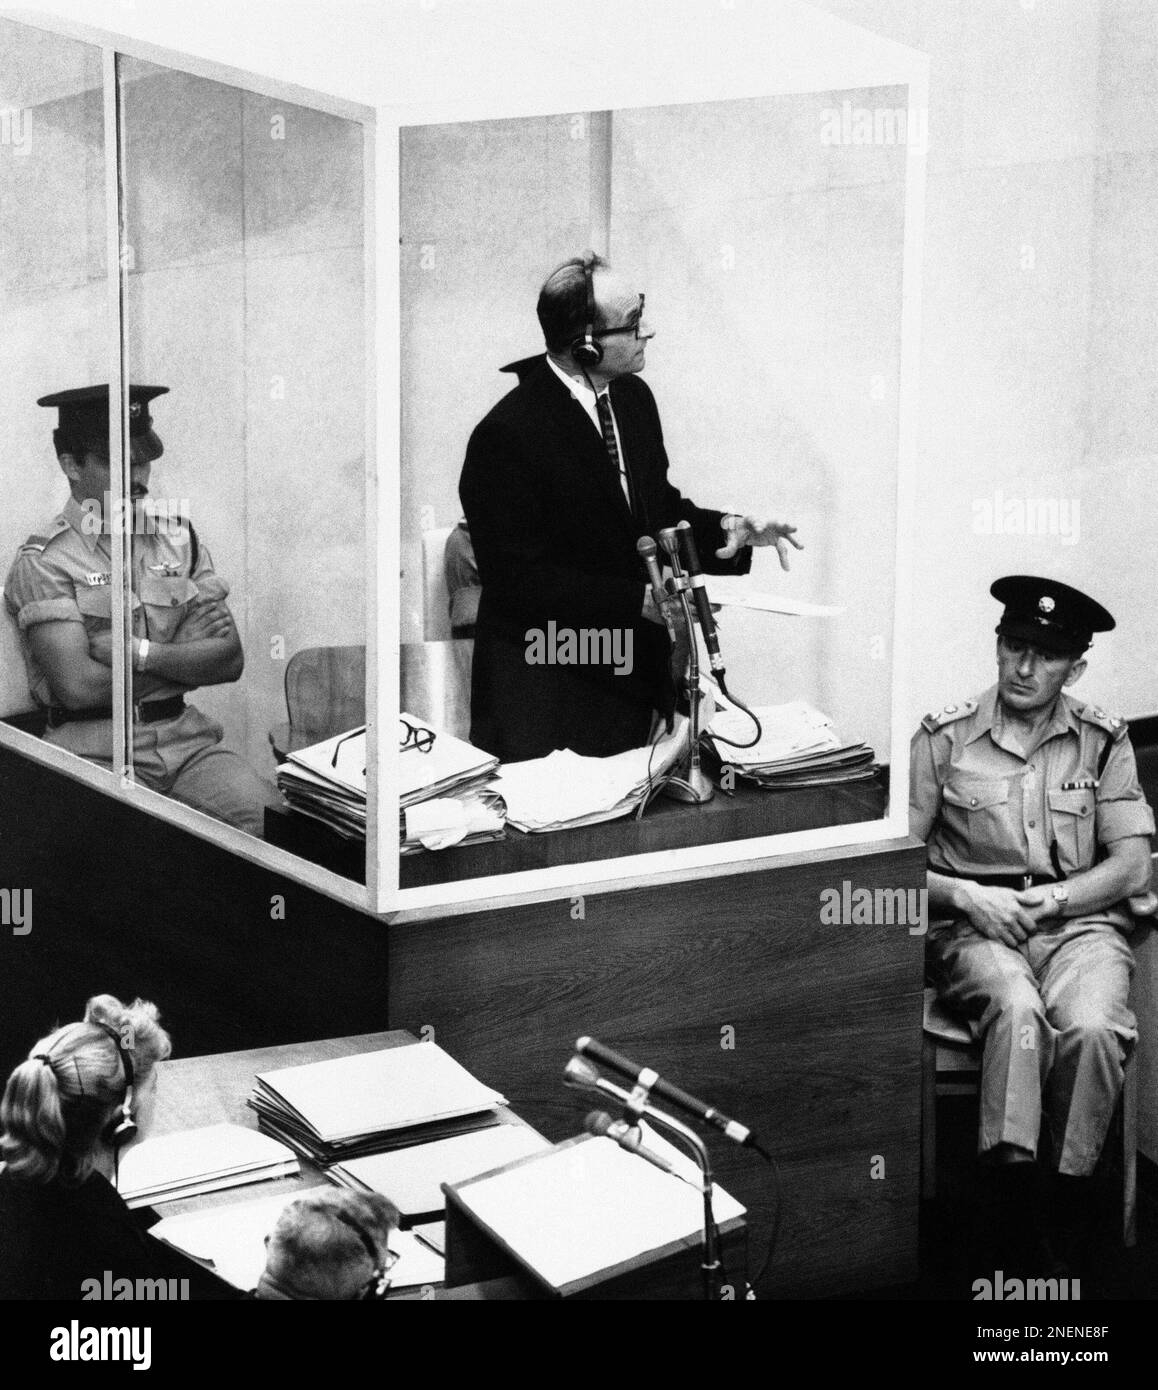 Adolf Eichmann turns toward judges bench as he emphasizes a point while testifying about Nazi documents during his trial in Jerusalem, July 3, 1961. The former Gestapo officer, on trial for criminal responsibility in the massacre of Jews during World War II, was on the witness stand for the 10th day, testifying in his own defense. (AP Photo) Stock Photo